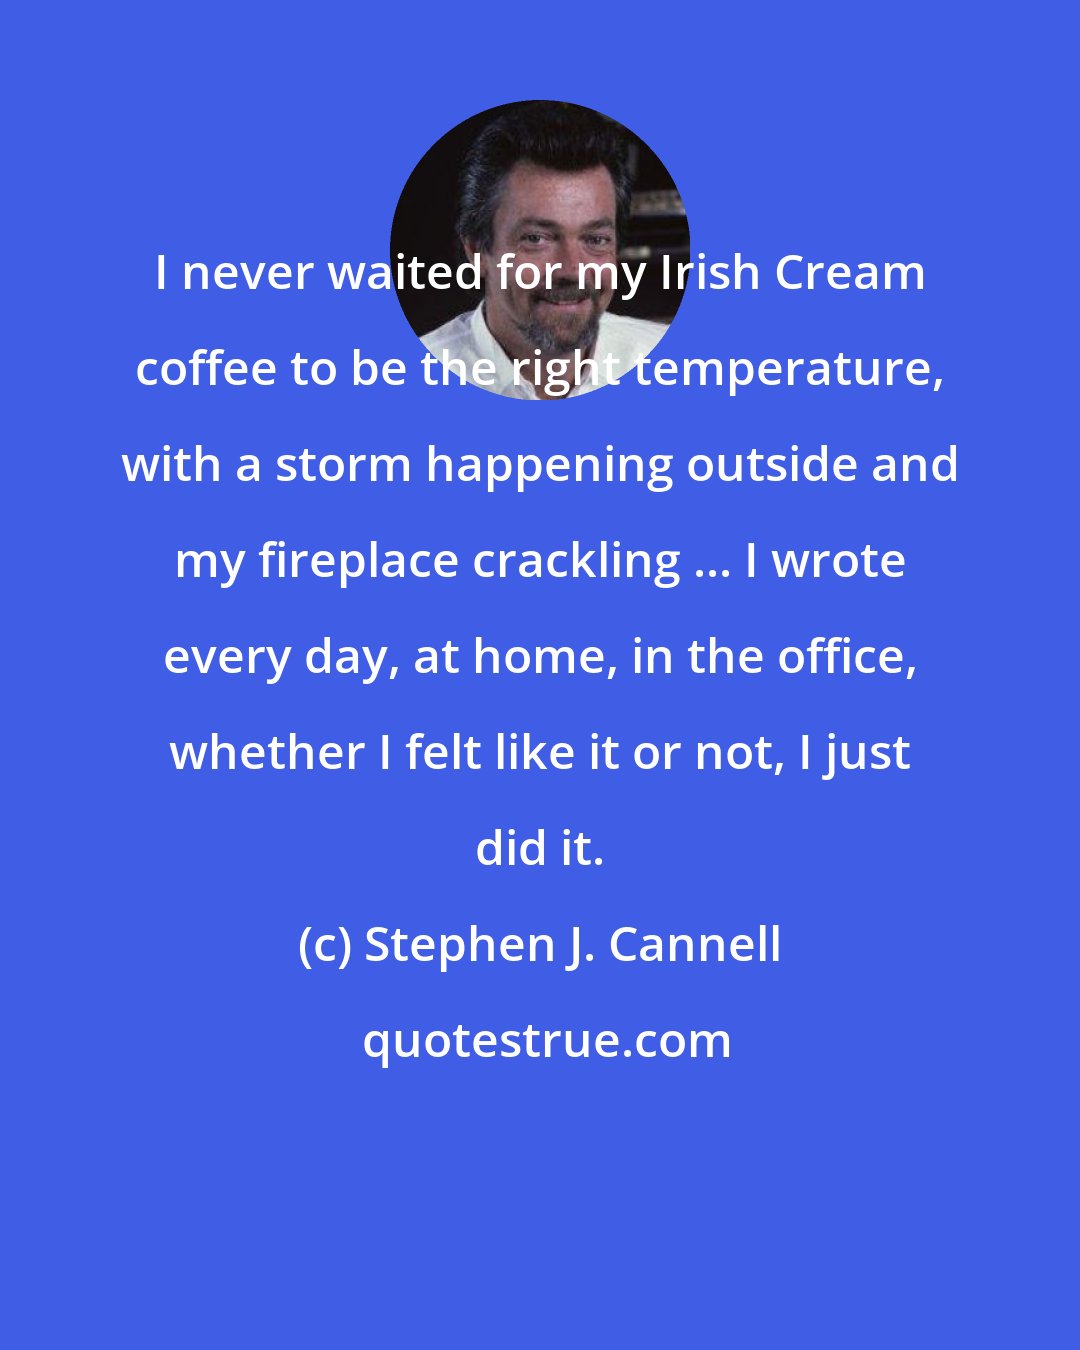 Stephen J. Cannell: I never waited for my Irish Cream coffee to be the right temperature, with a storm happening outside and my fireplace crackling ... I wrote every day, at home, in the office, whether I felt like it or not, I just did it.